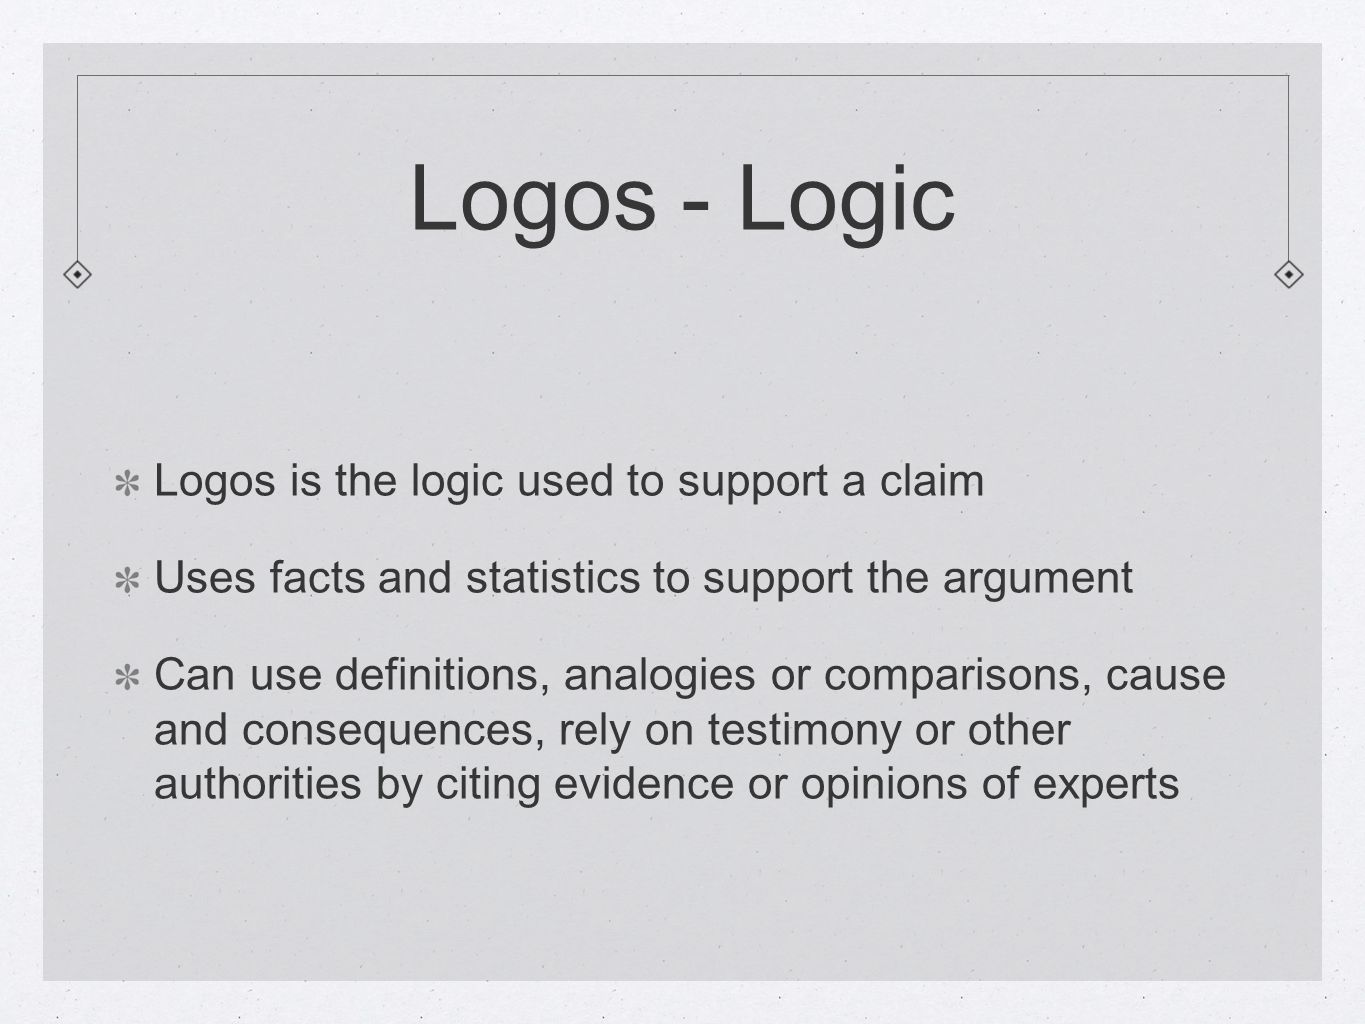 Logos - Logic Logos is the logic used to support a claim Uses facts and statistics to support the argument Can use definitions, analogies or comparisons, cause and consequences, rely on testimony or other authorities by citing evidence or opinions of experts